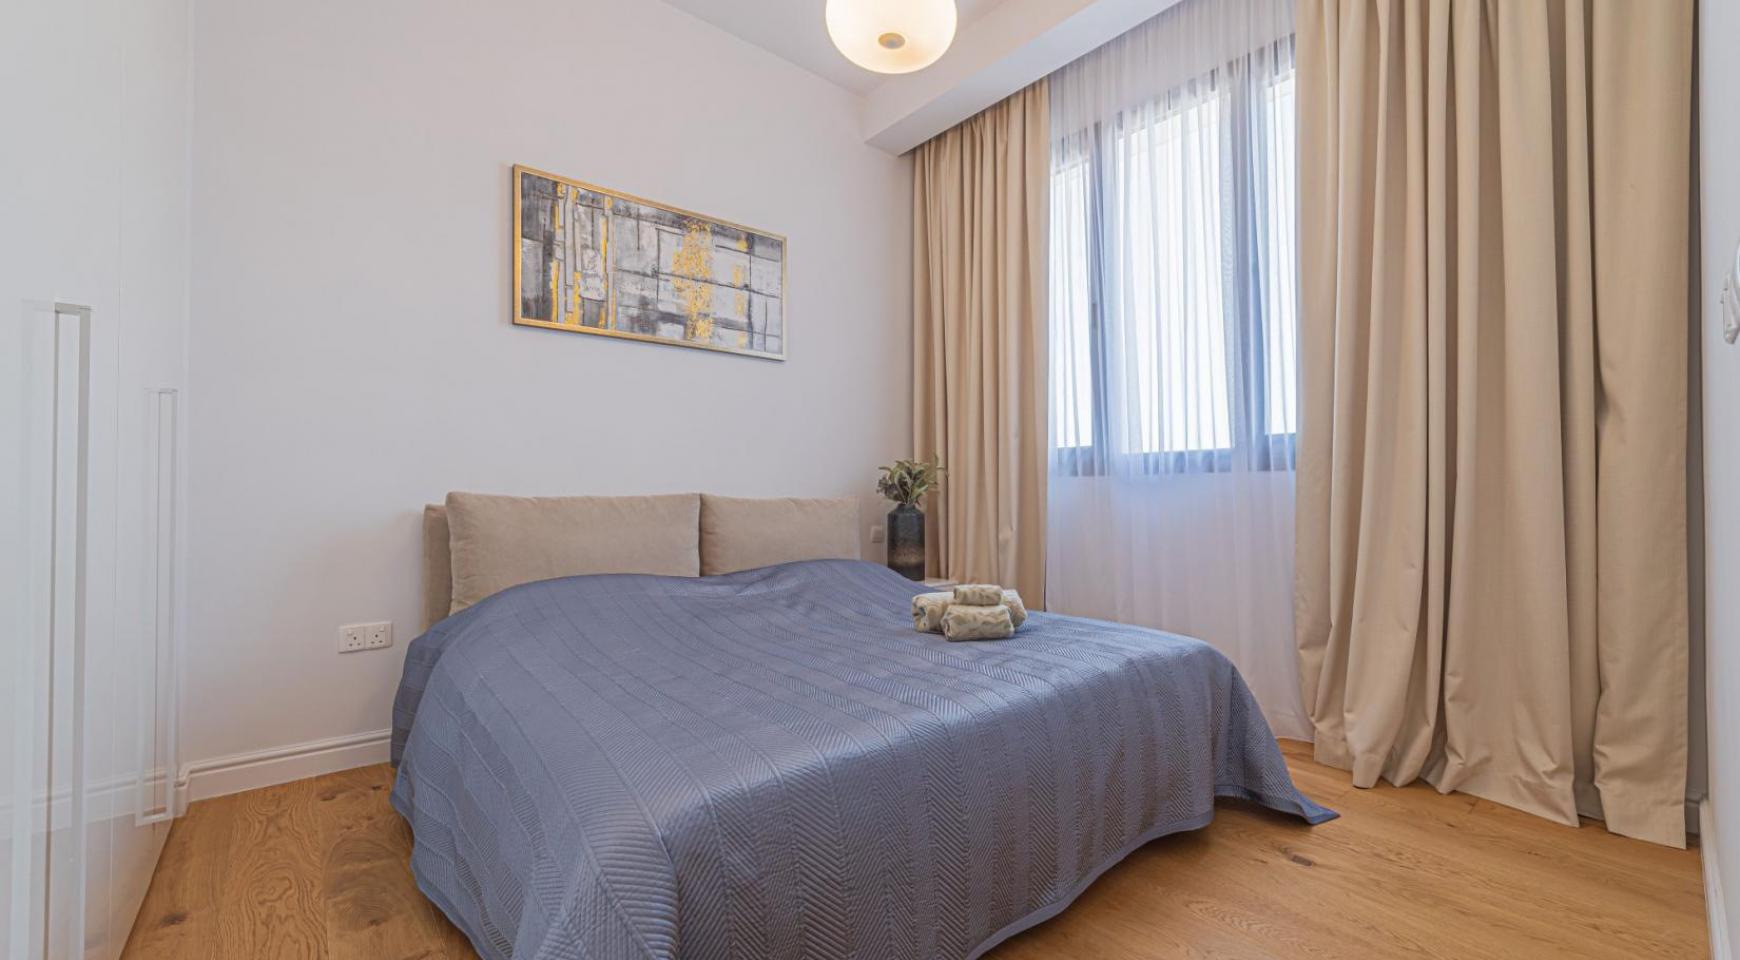 Hortensia Residence, Apt. 301. 2 Bedroom Apartment within a New Complex near the Sea  - 58